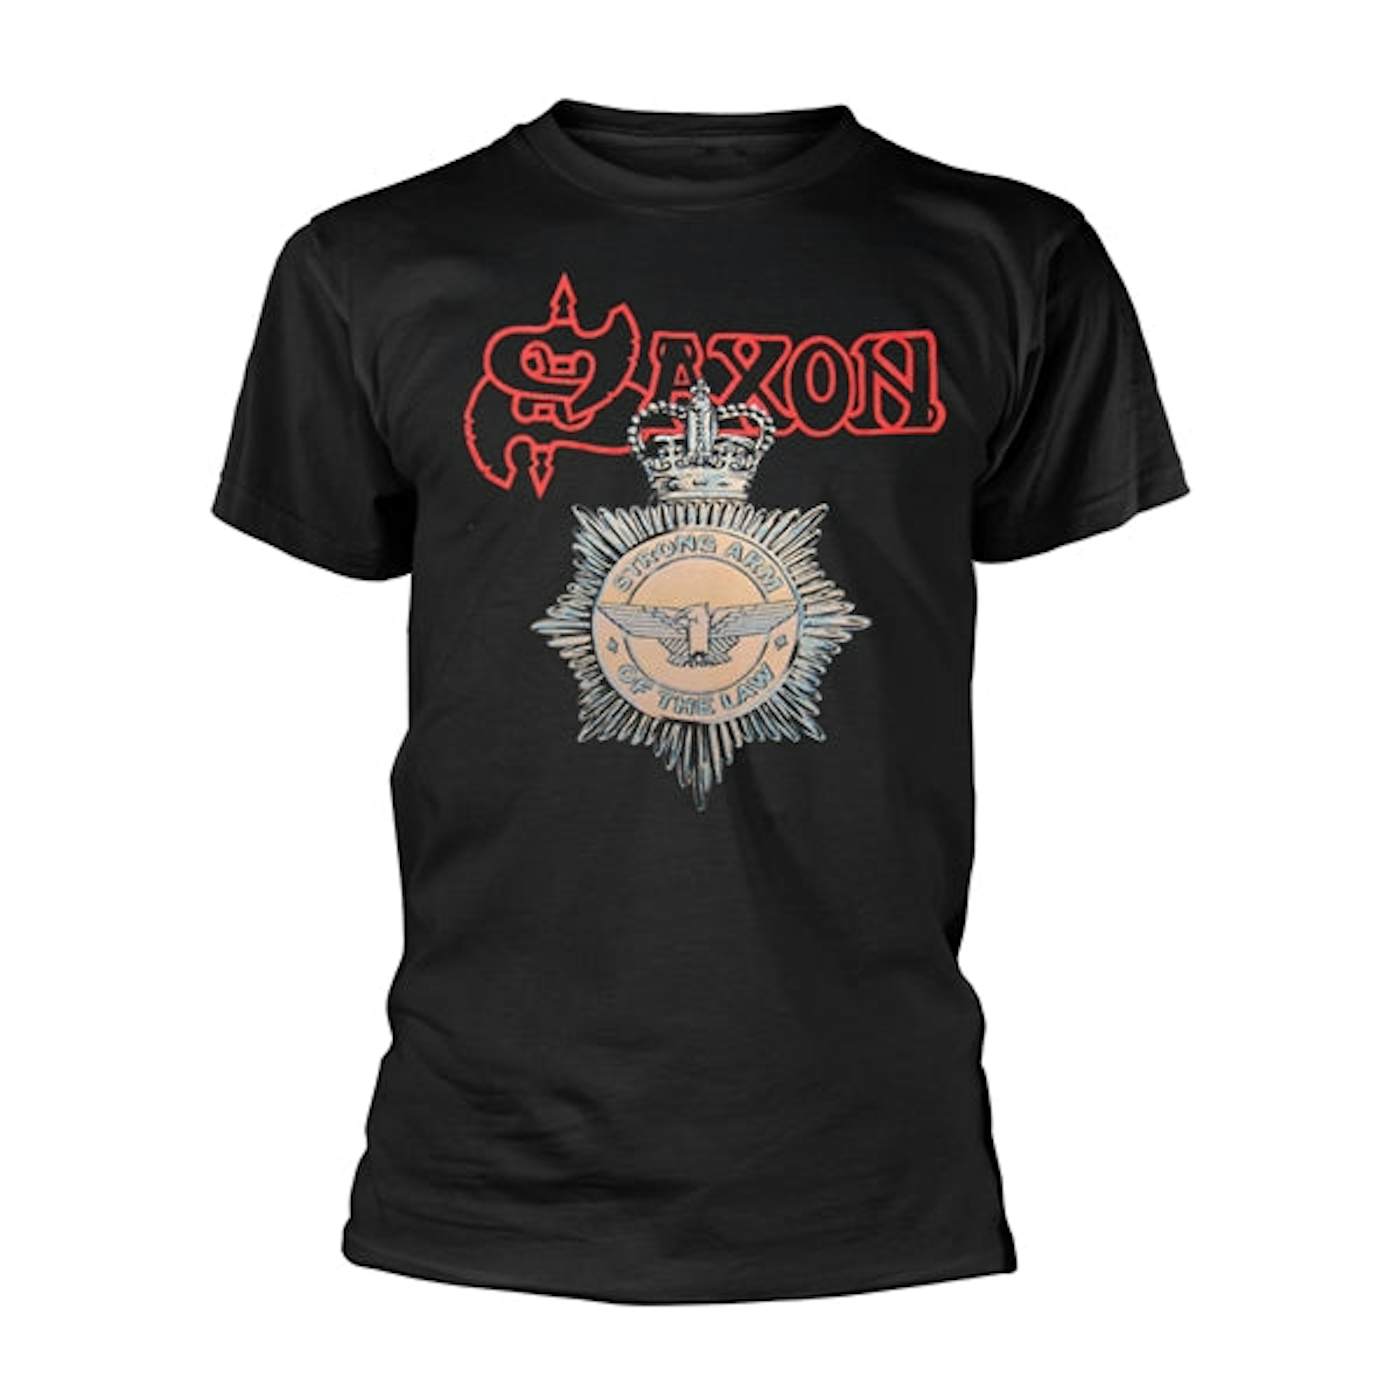 Saxon T Shirt - Strong Arm Of The Law